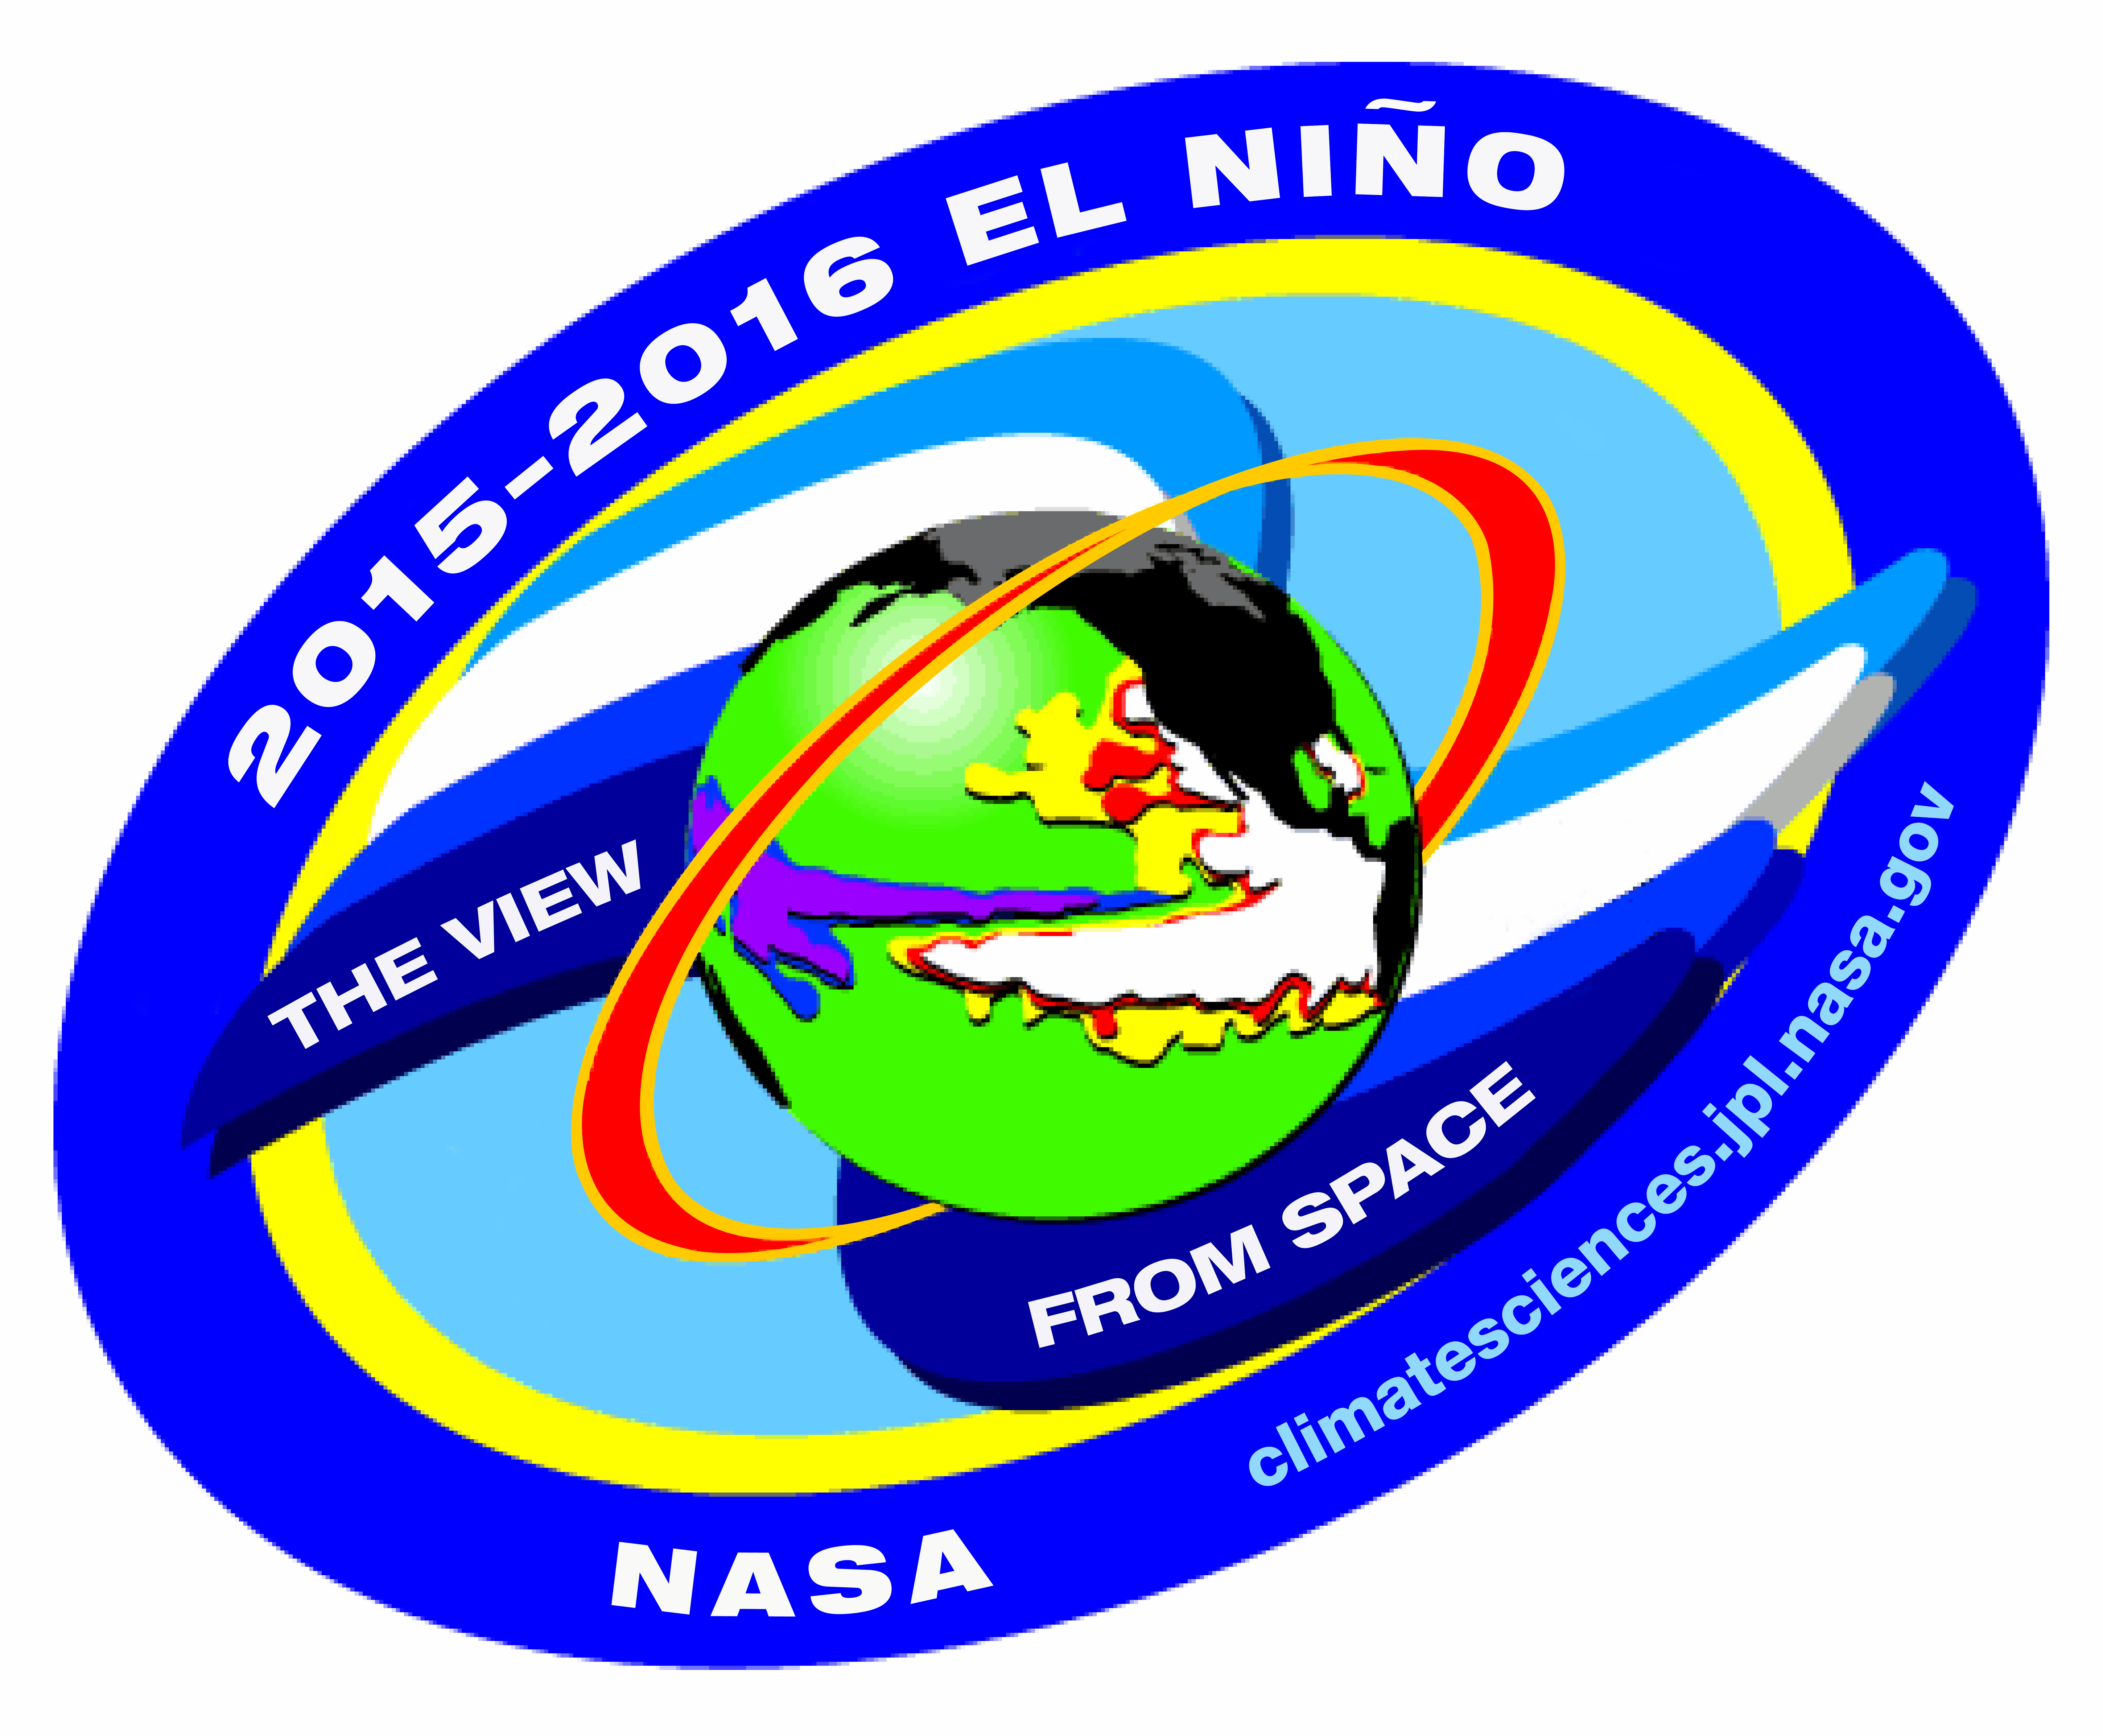 Center for Climate Sciences: 2015-2016 El Nino decal